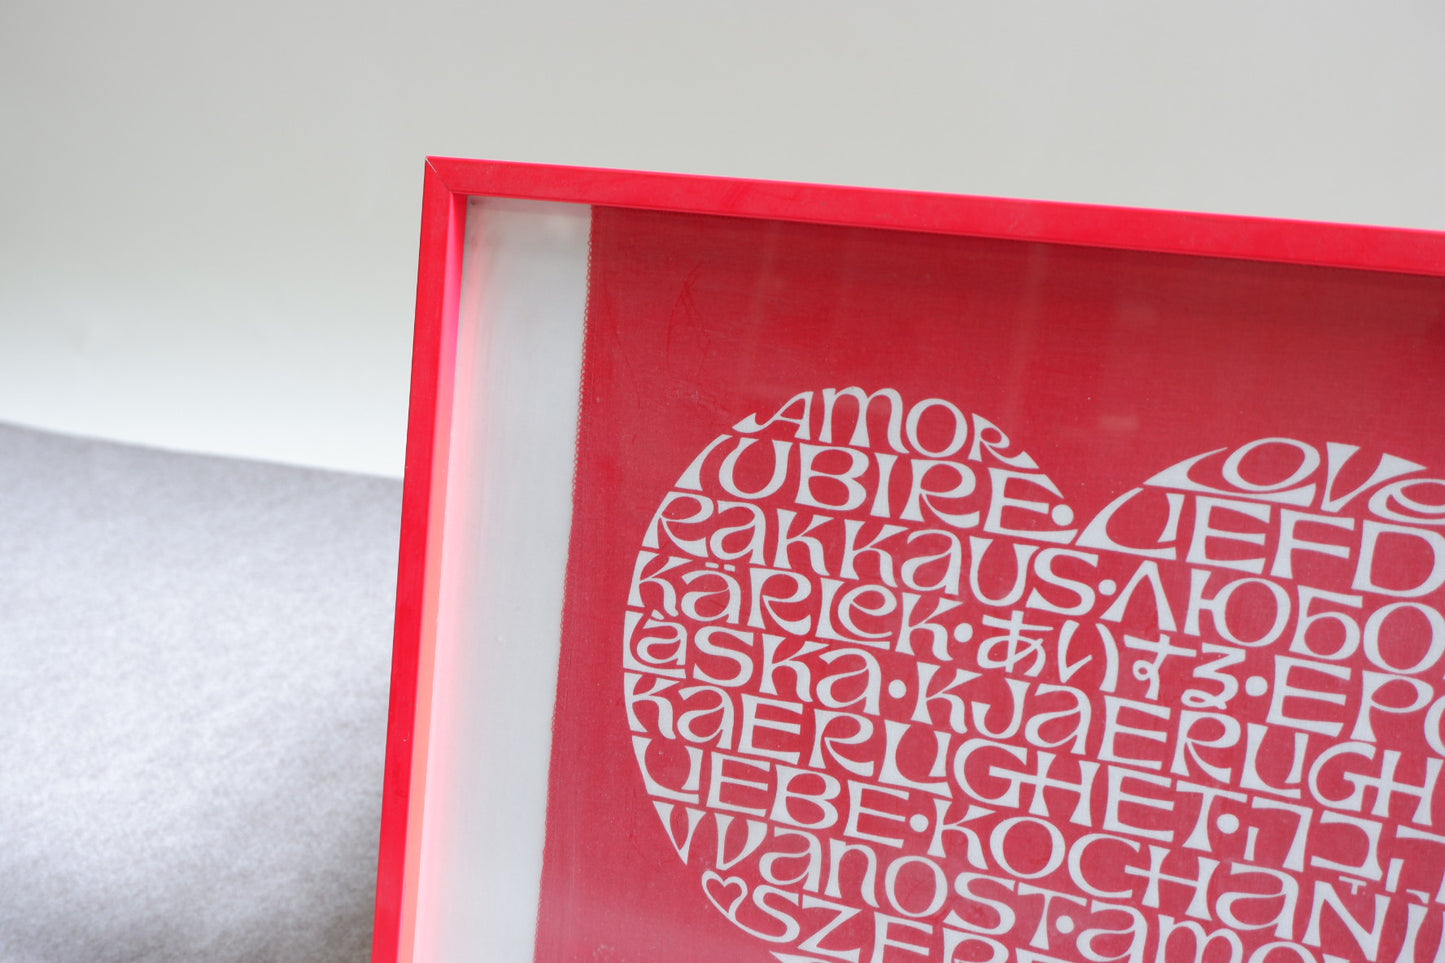 Product photo of "Herman Miller International Love Heart" of THE ONE&ONLY